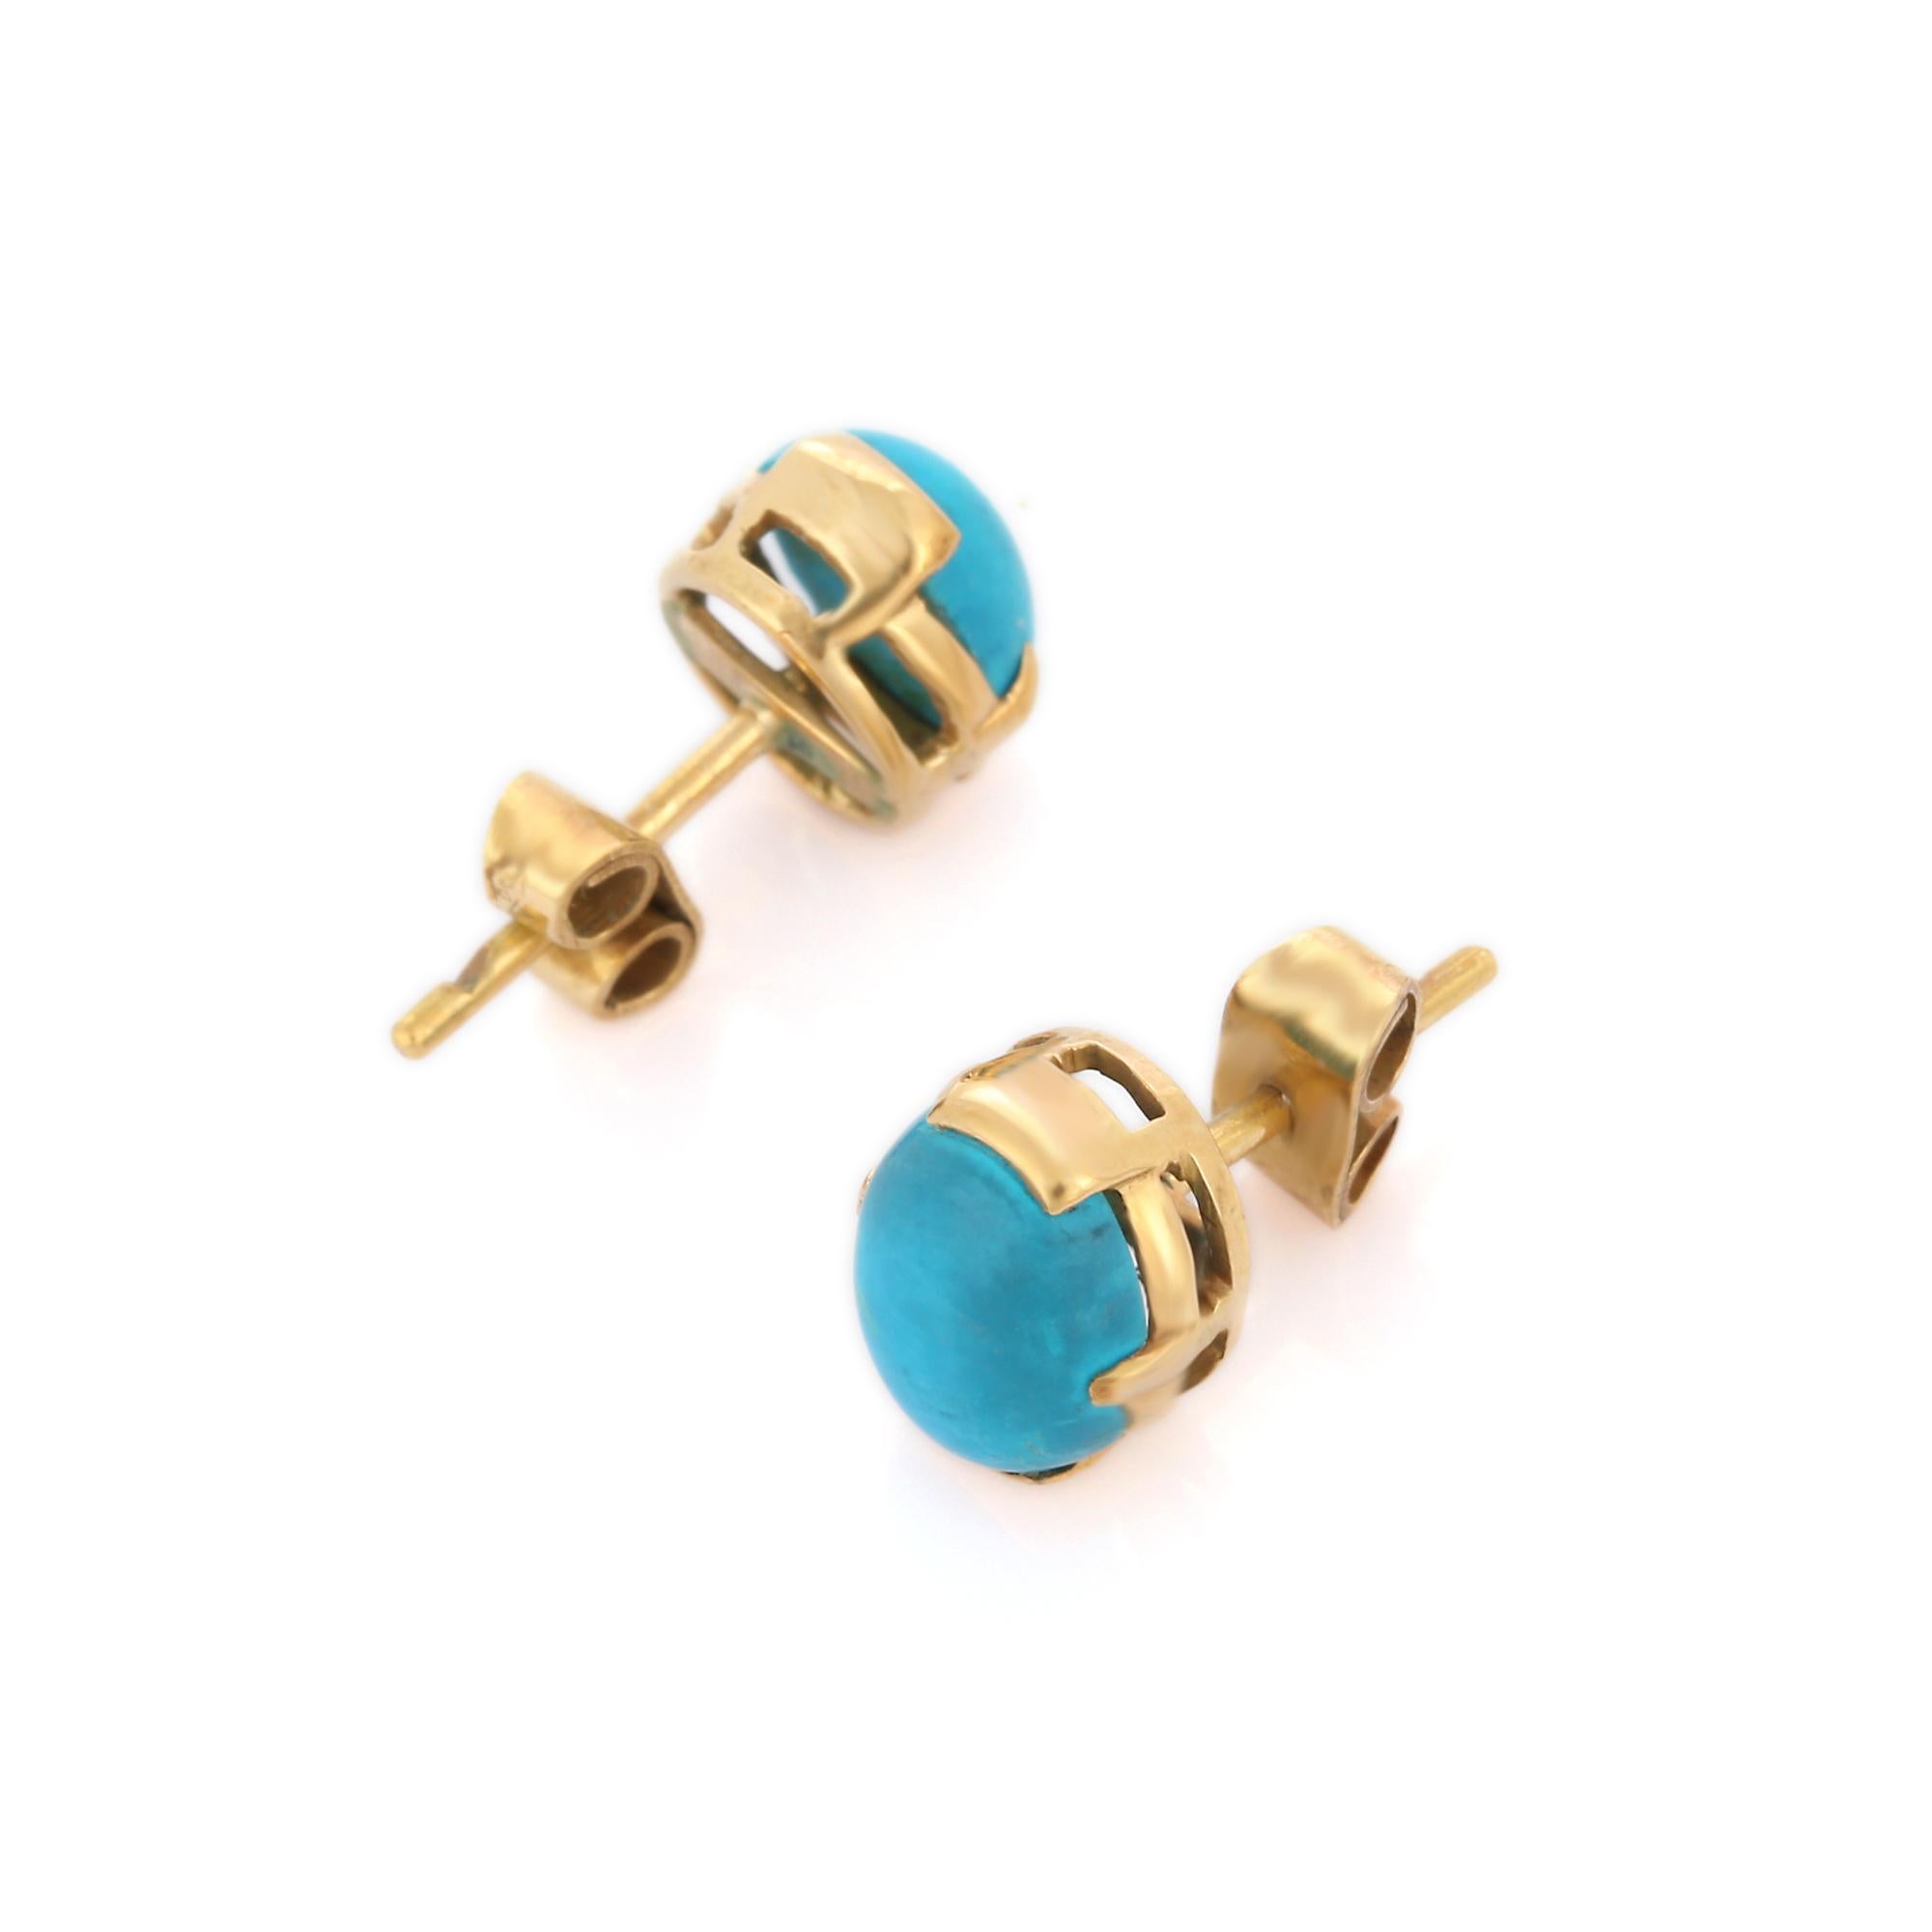 Studs create a subtle beauty while showcasing the colors of the natural precious gemstones. These minimal ear studs will effortlessly make you stand out.

Oval cut cabochon turquoise studs in 18K gold. Embrace your look with these stunning pair of